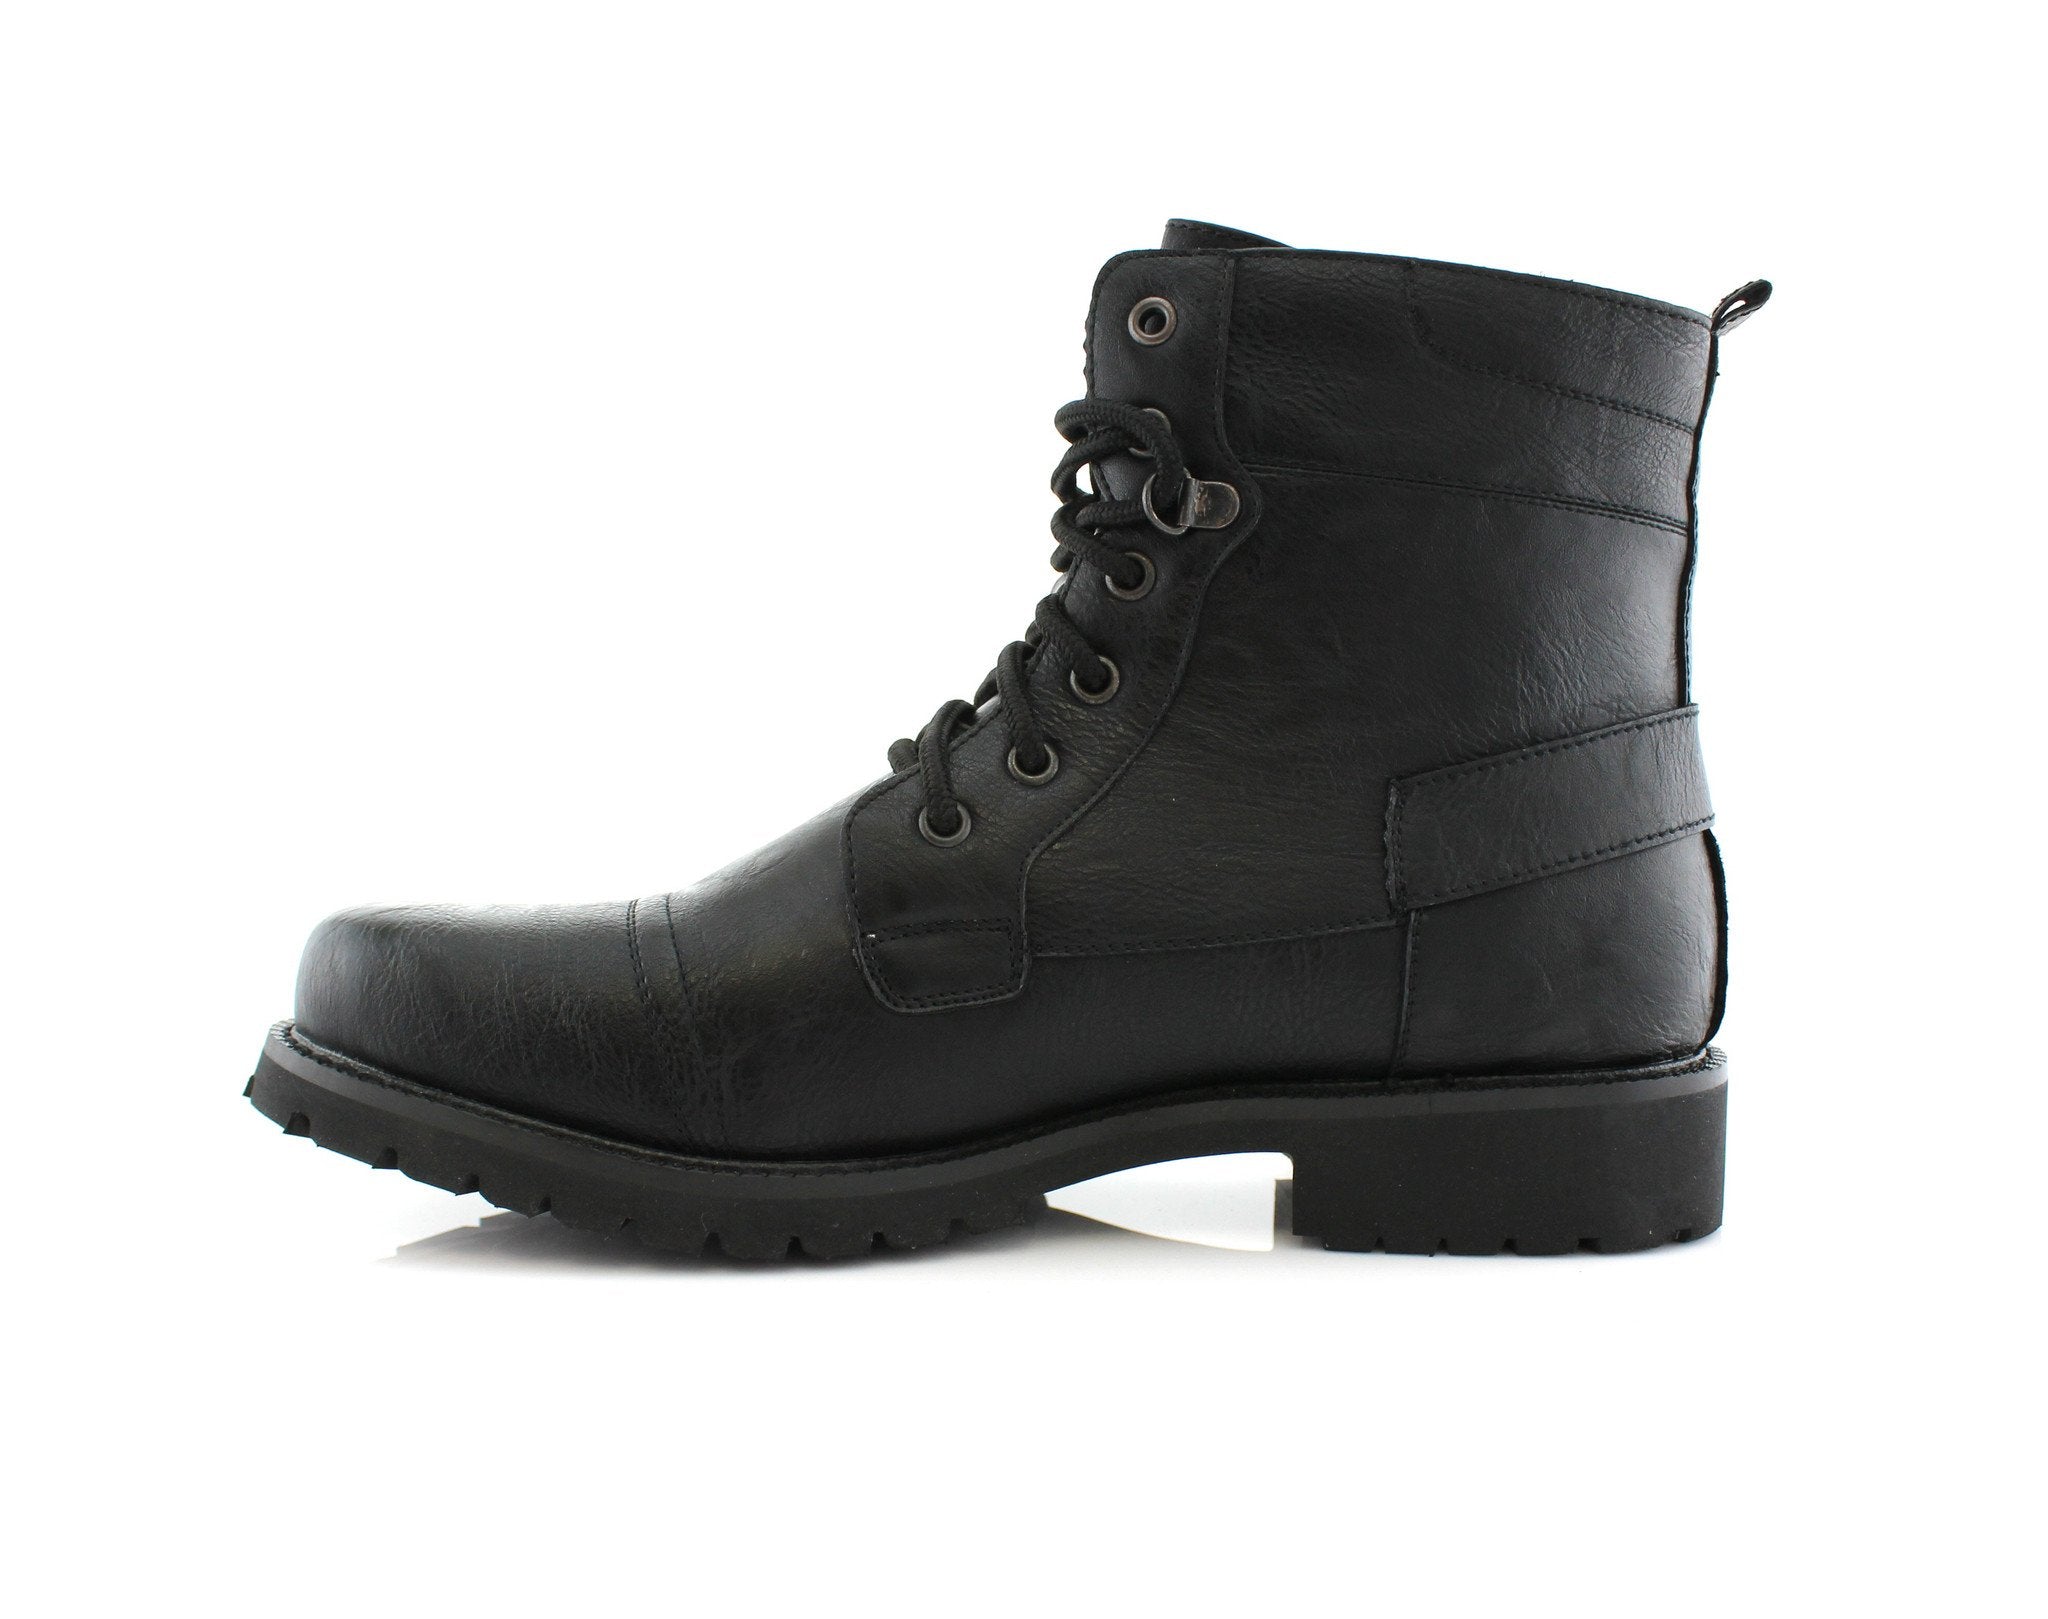 Rugged Inner Boots | Fabian by Polar Fox | Conal Footwear | Inner Side Angle View